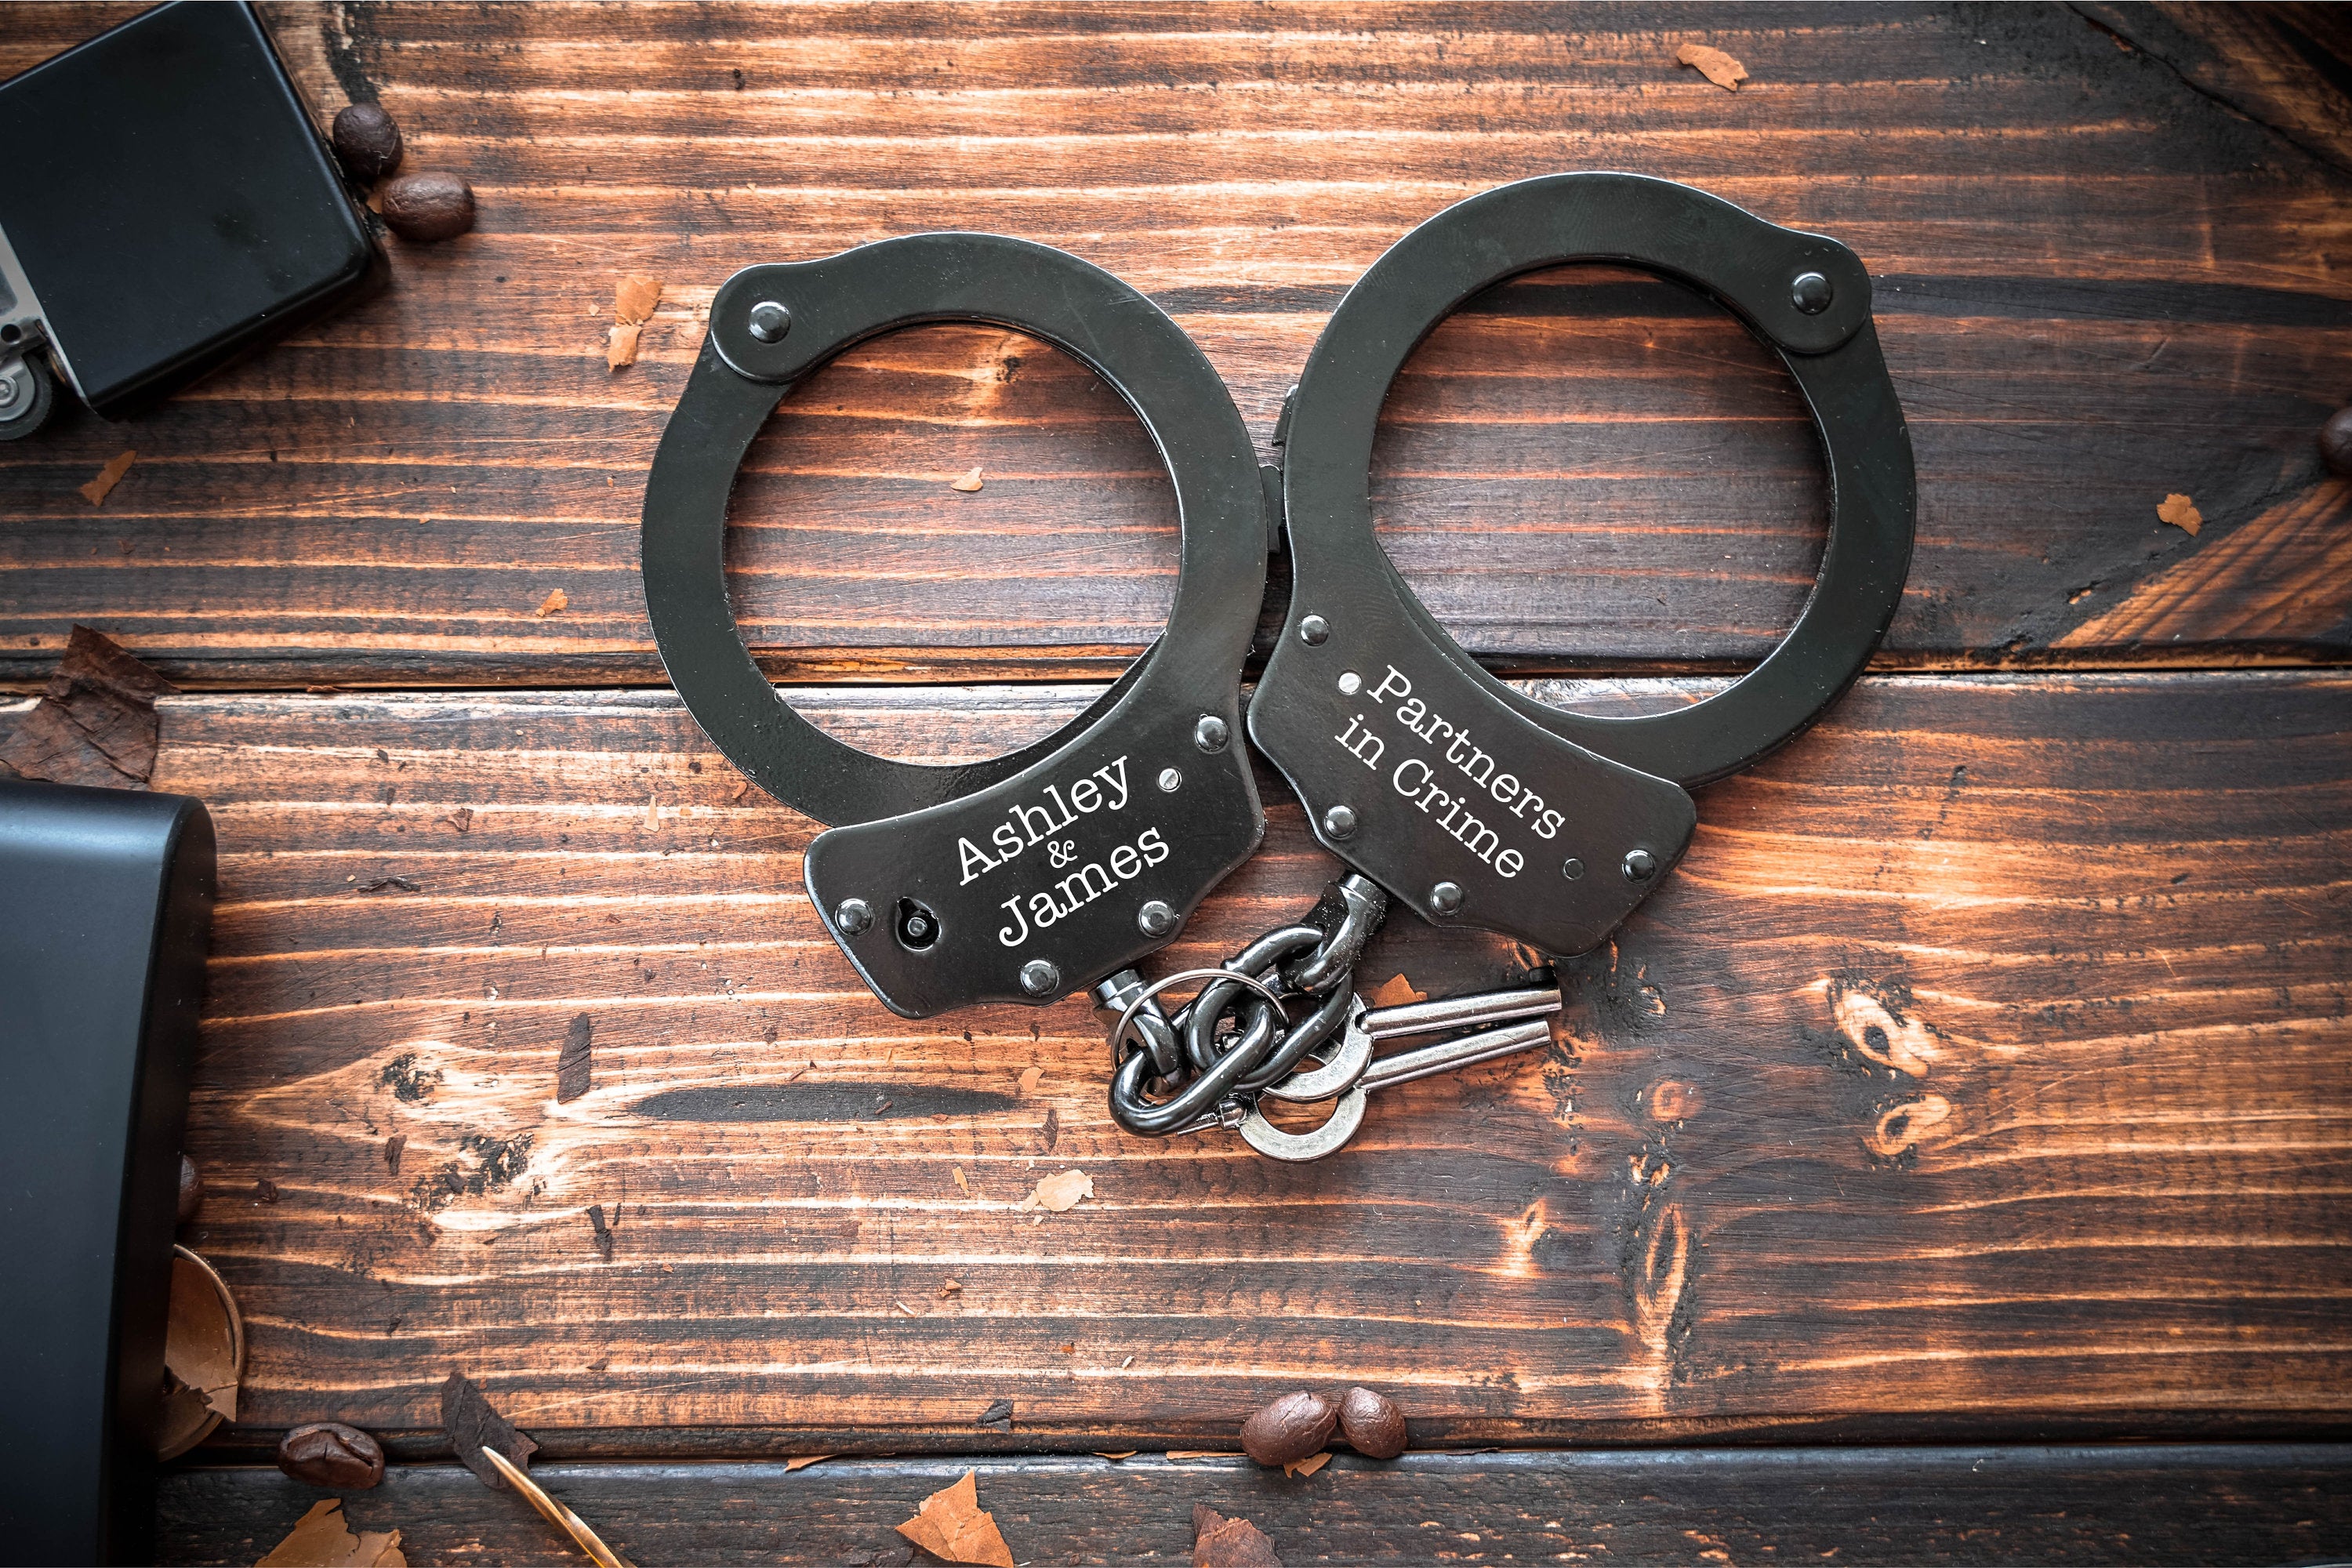 Personalized Handcuffs, Police Handcuffs, Sex Handcuff, Fetish Cuffs, Erotic Accesories, Gift For Men, Christmas Gifts, Holiday Gifts, BDSM